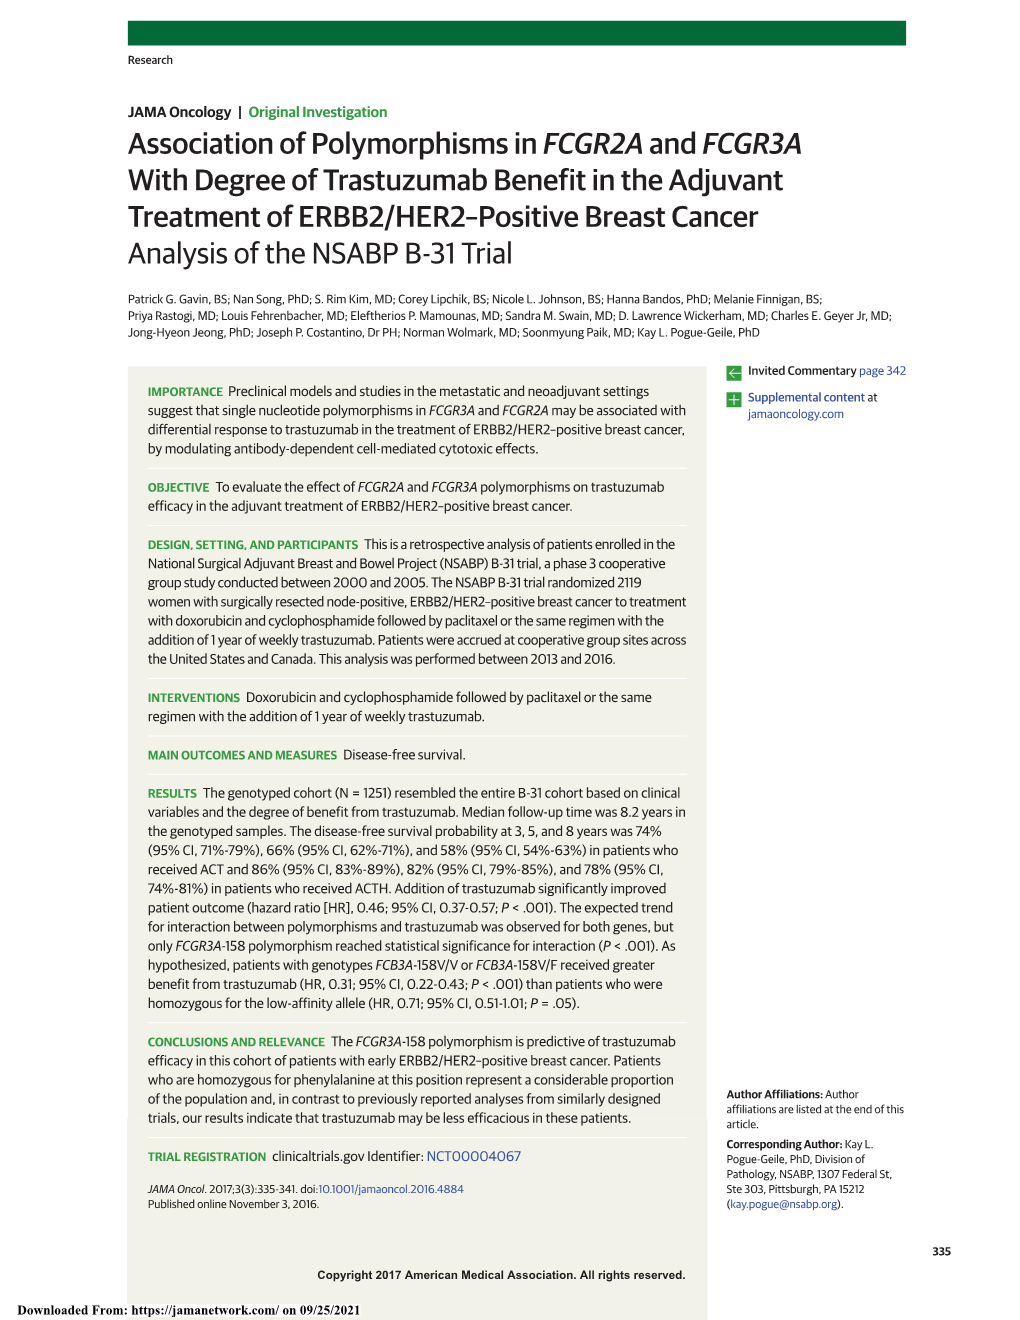 Association of Polymorphisms in FCGR2A and FCGR3A with Degree of Trastuzumab Benefit in the Adjuvant Treatment of ERBB2/HER2–P